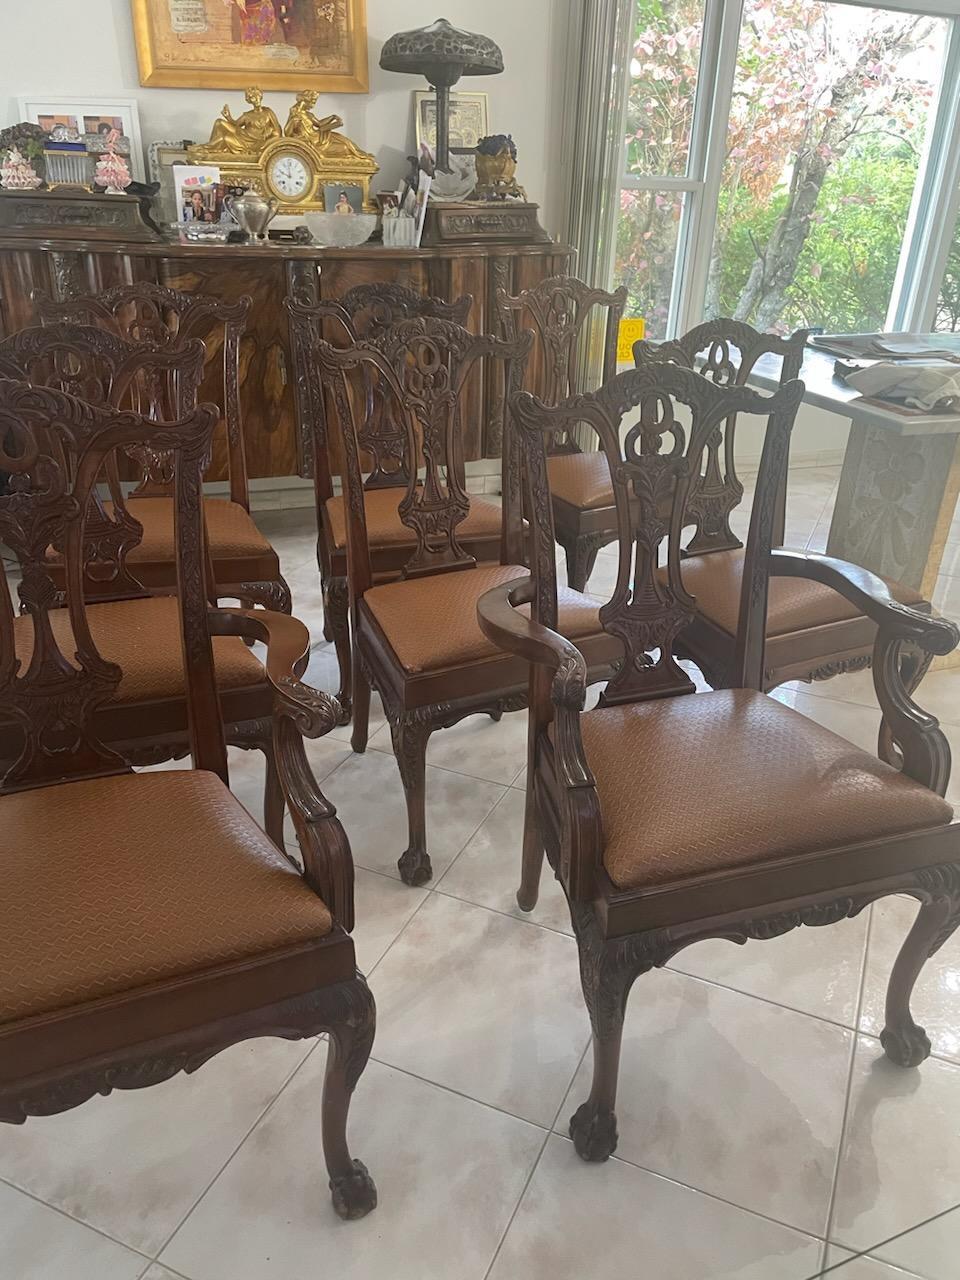 The Following Item we are Offering is Rare Set of Important Fine Estate Suite of Eight George III-Style Mahogany Dining Chairs
20th century, consisting of a pair of armchairs, and six side chairs, each with a pierced and carved backsplat and custom